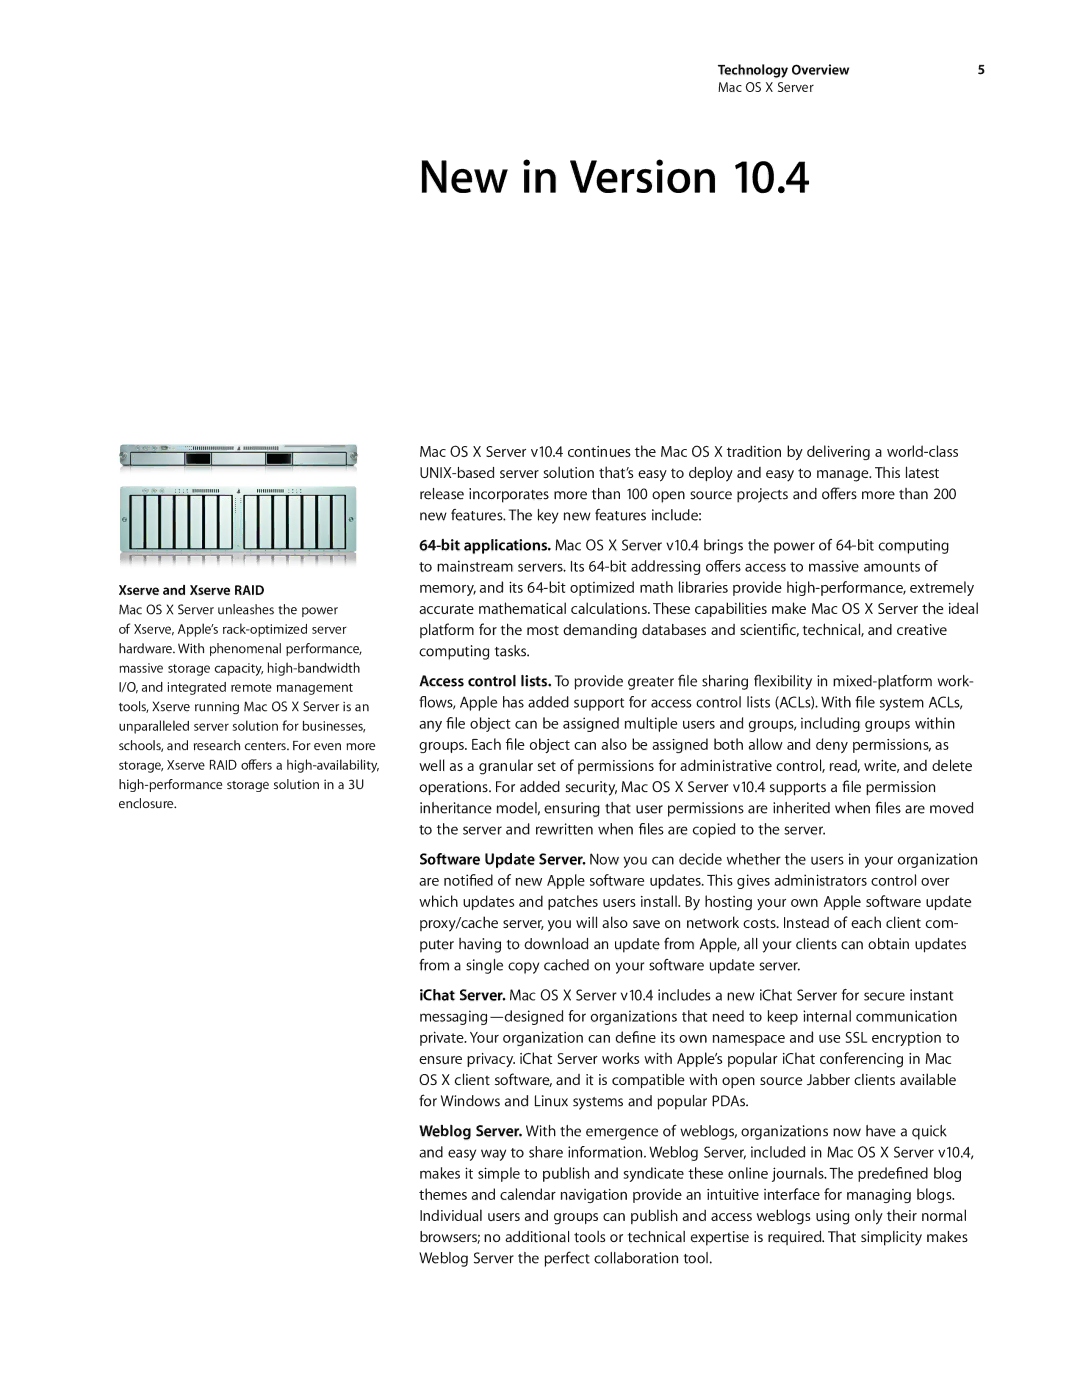 Apple G0442 manual New in Version, Xserve and Xserve RAID 